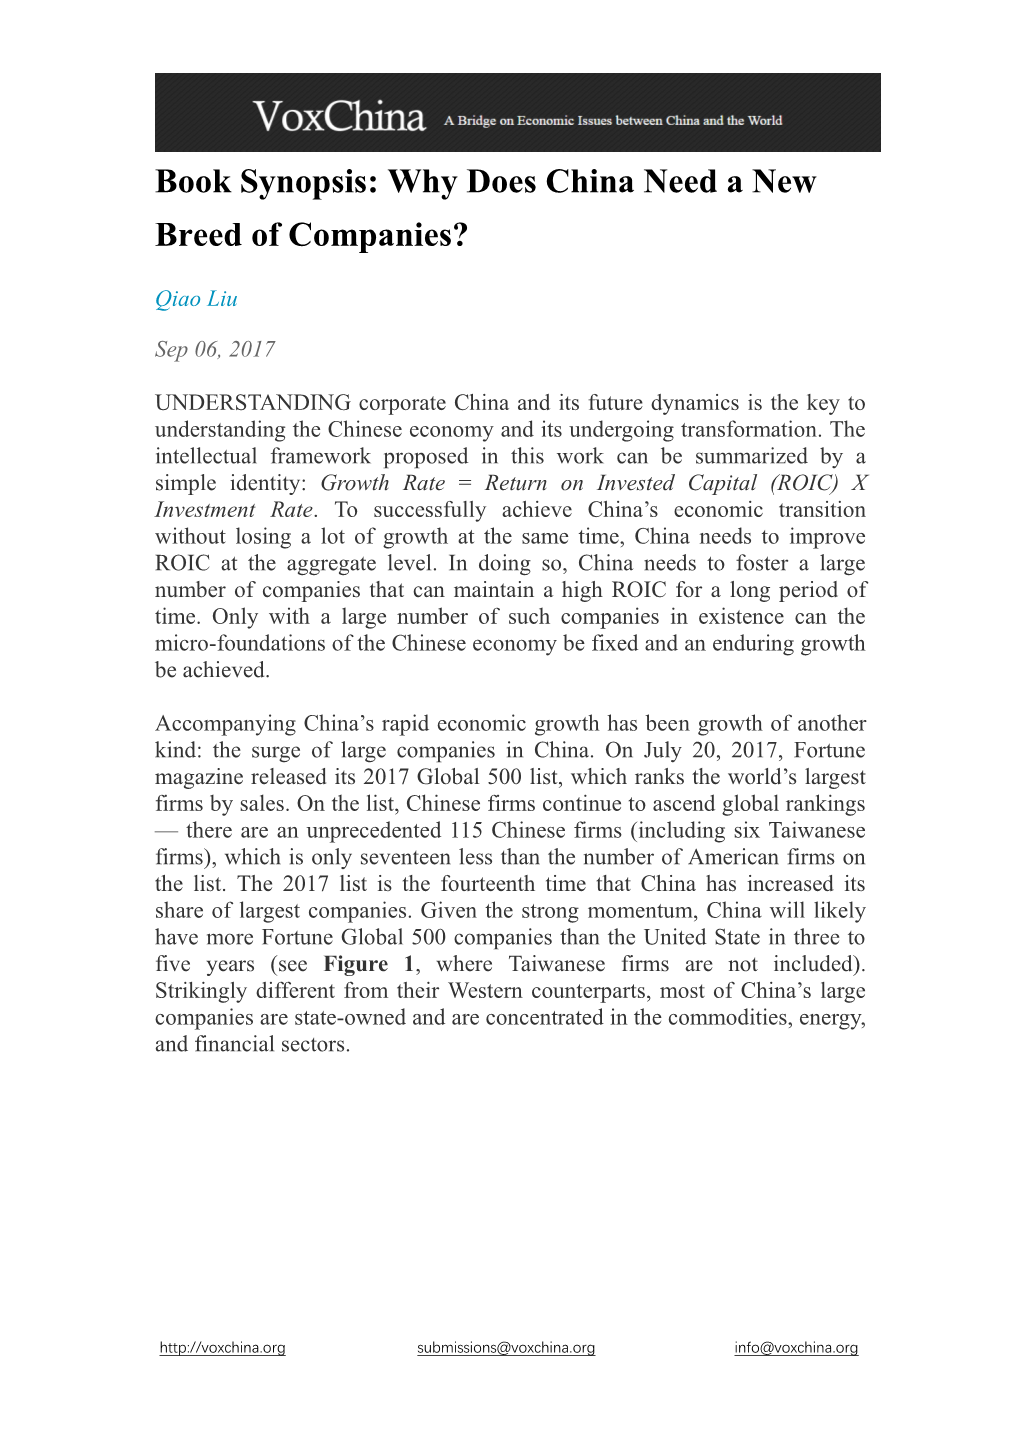 Book Synopsis: Why Does China Need a New Breed of Companies?